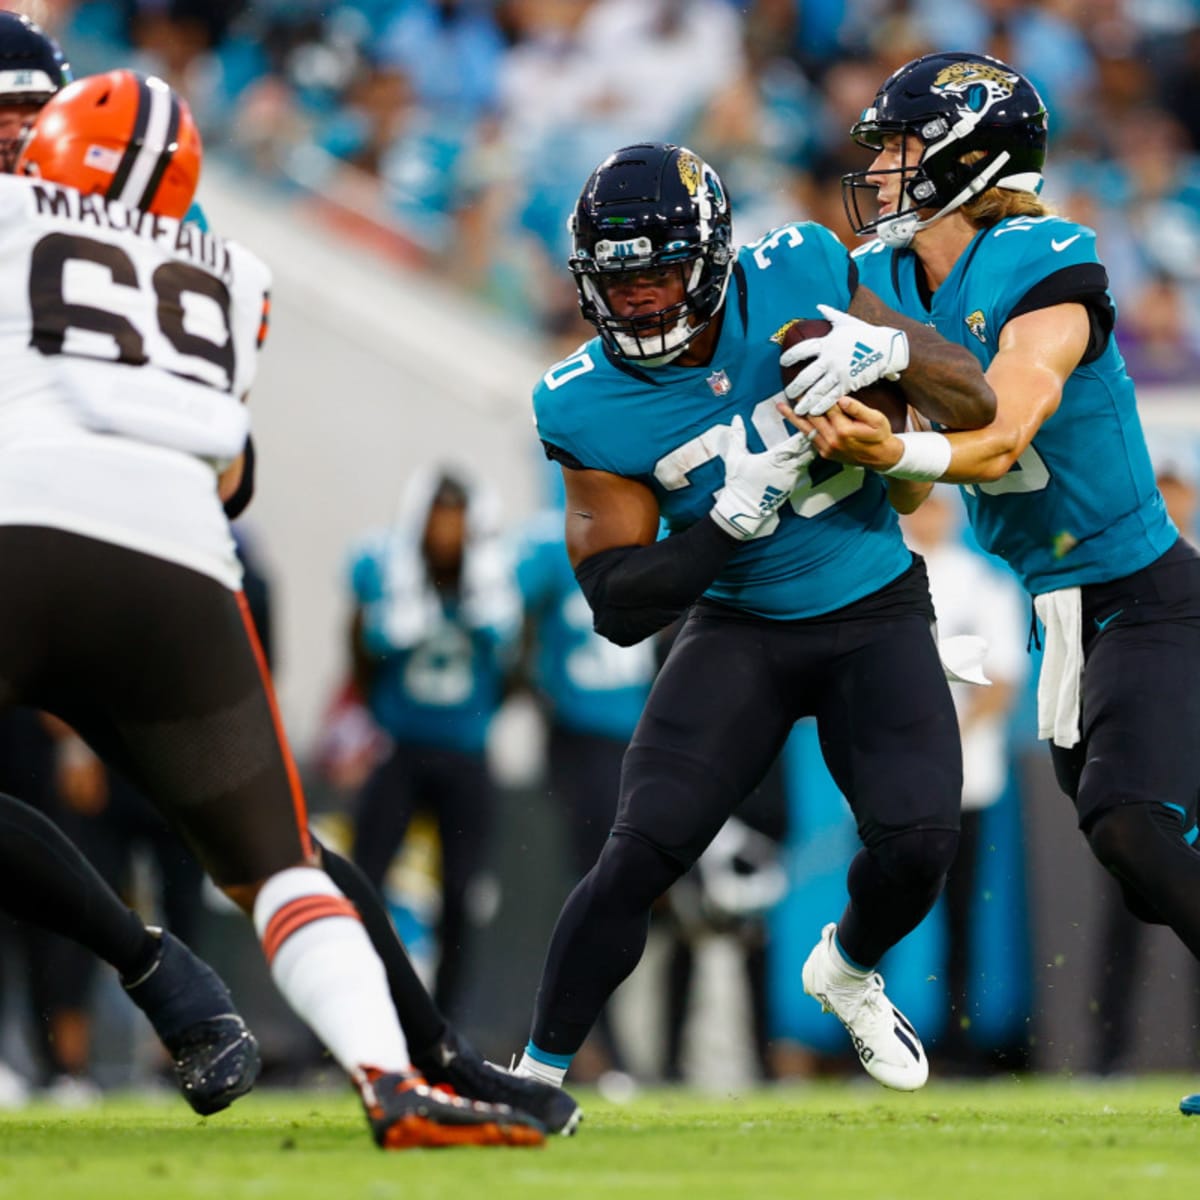 Jacksonville Jaguars Fall 23-13 To Browns in Preseason Opener As Lawrence  Makes NFL Debut - Sports Illustrated Jacksonville Jaguars News, Analysis  and More